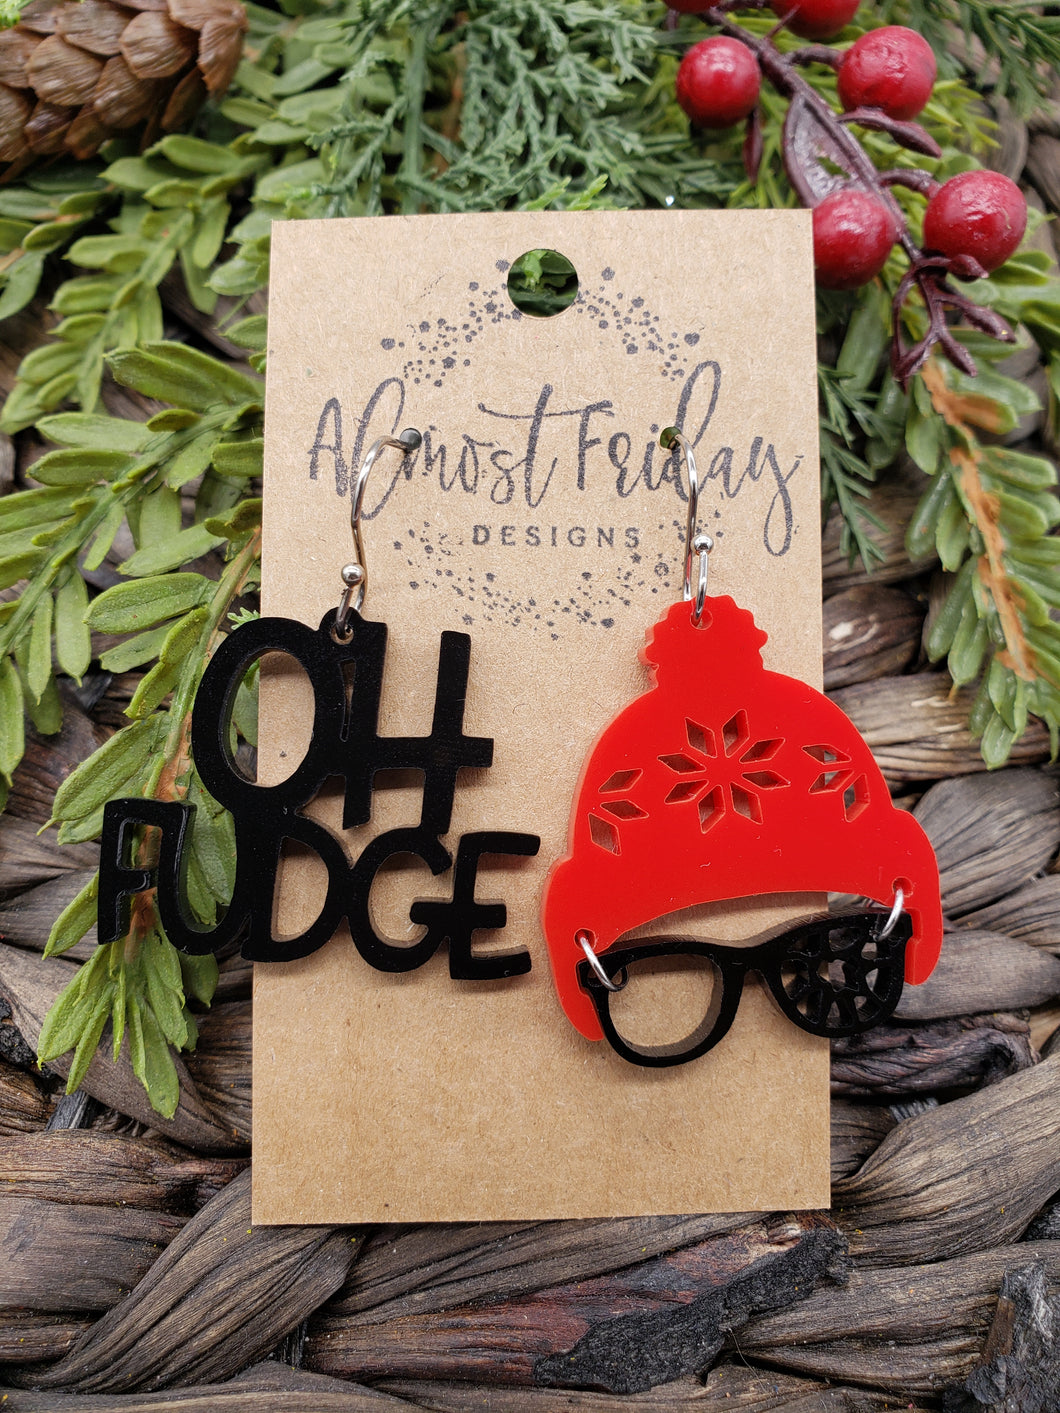 Acrylic Earrings - Christmas Earrings - Christmas Story - Winter - Cut Out Earrings - Ralphie - Statement Earrings - You'll Shoot Your Eye Out - Oh Fudge